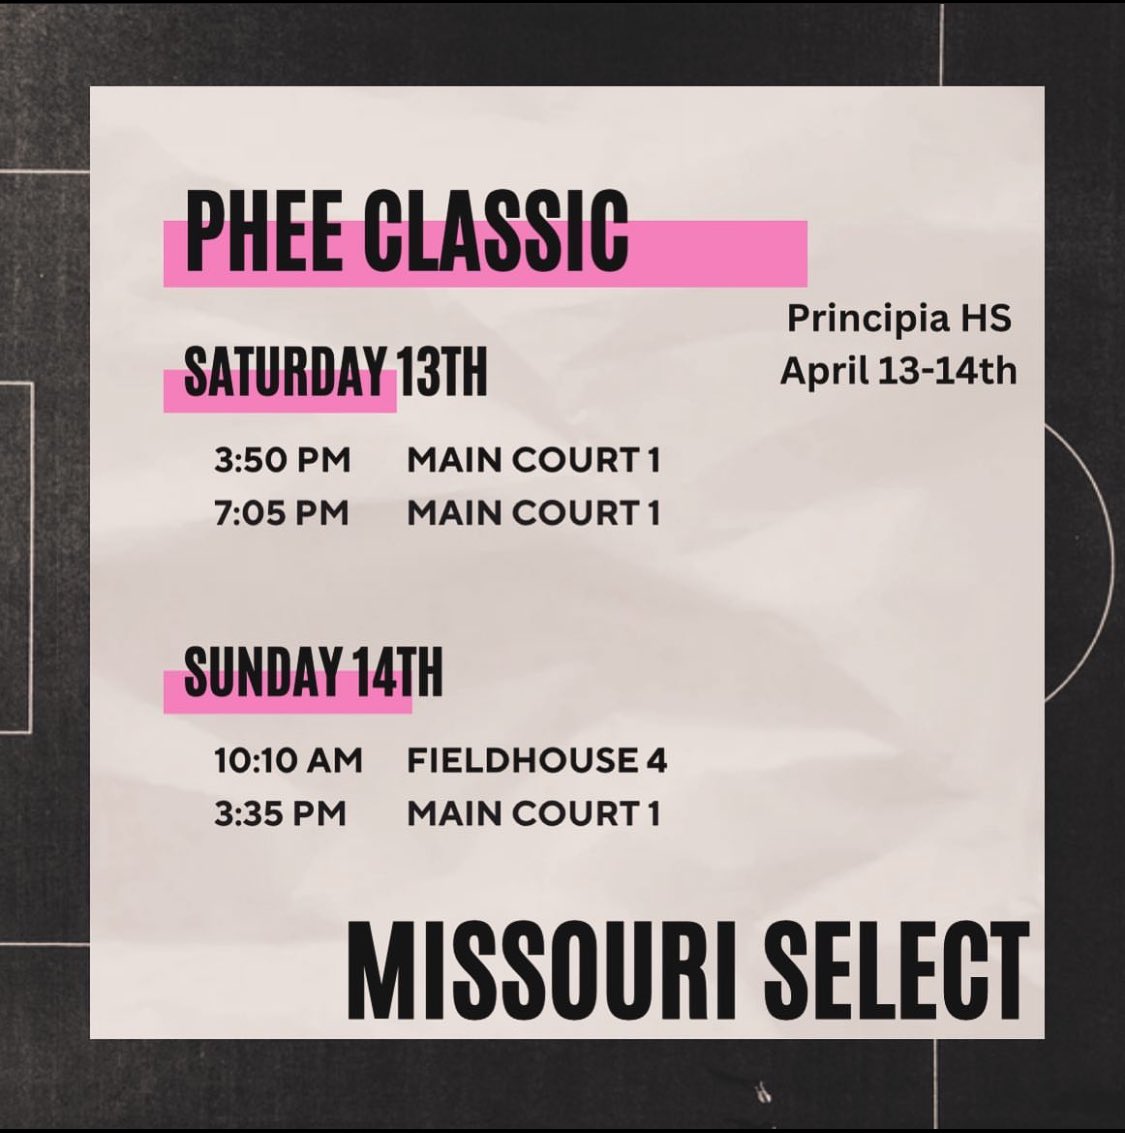 Come check out me and my team this weekend at the Phee Classic. @SHOtimeSGFMO